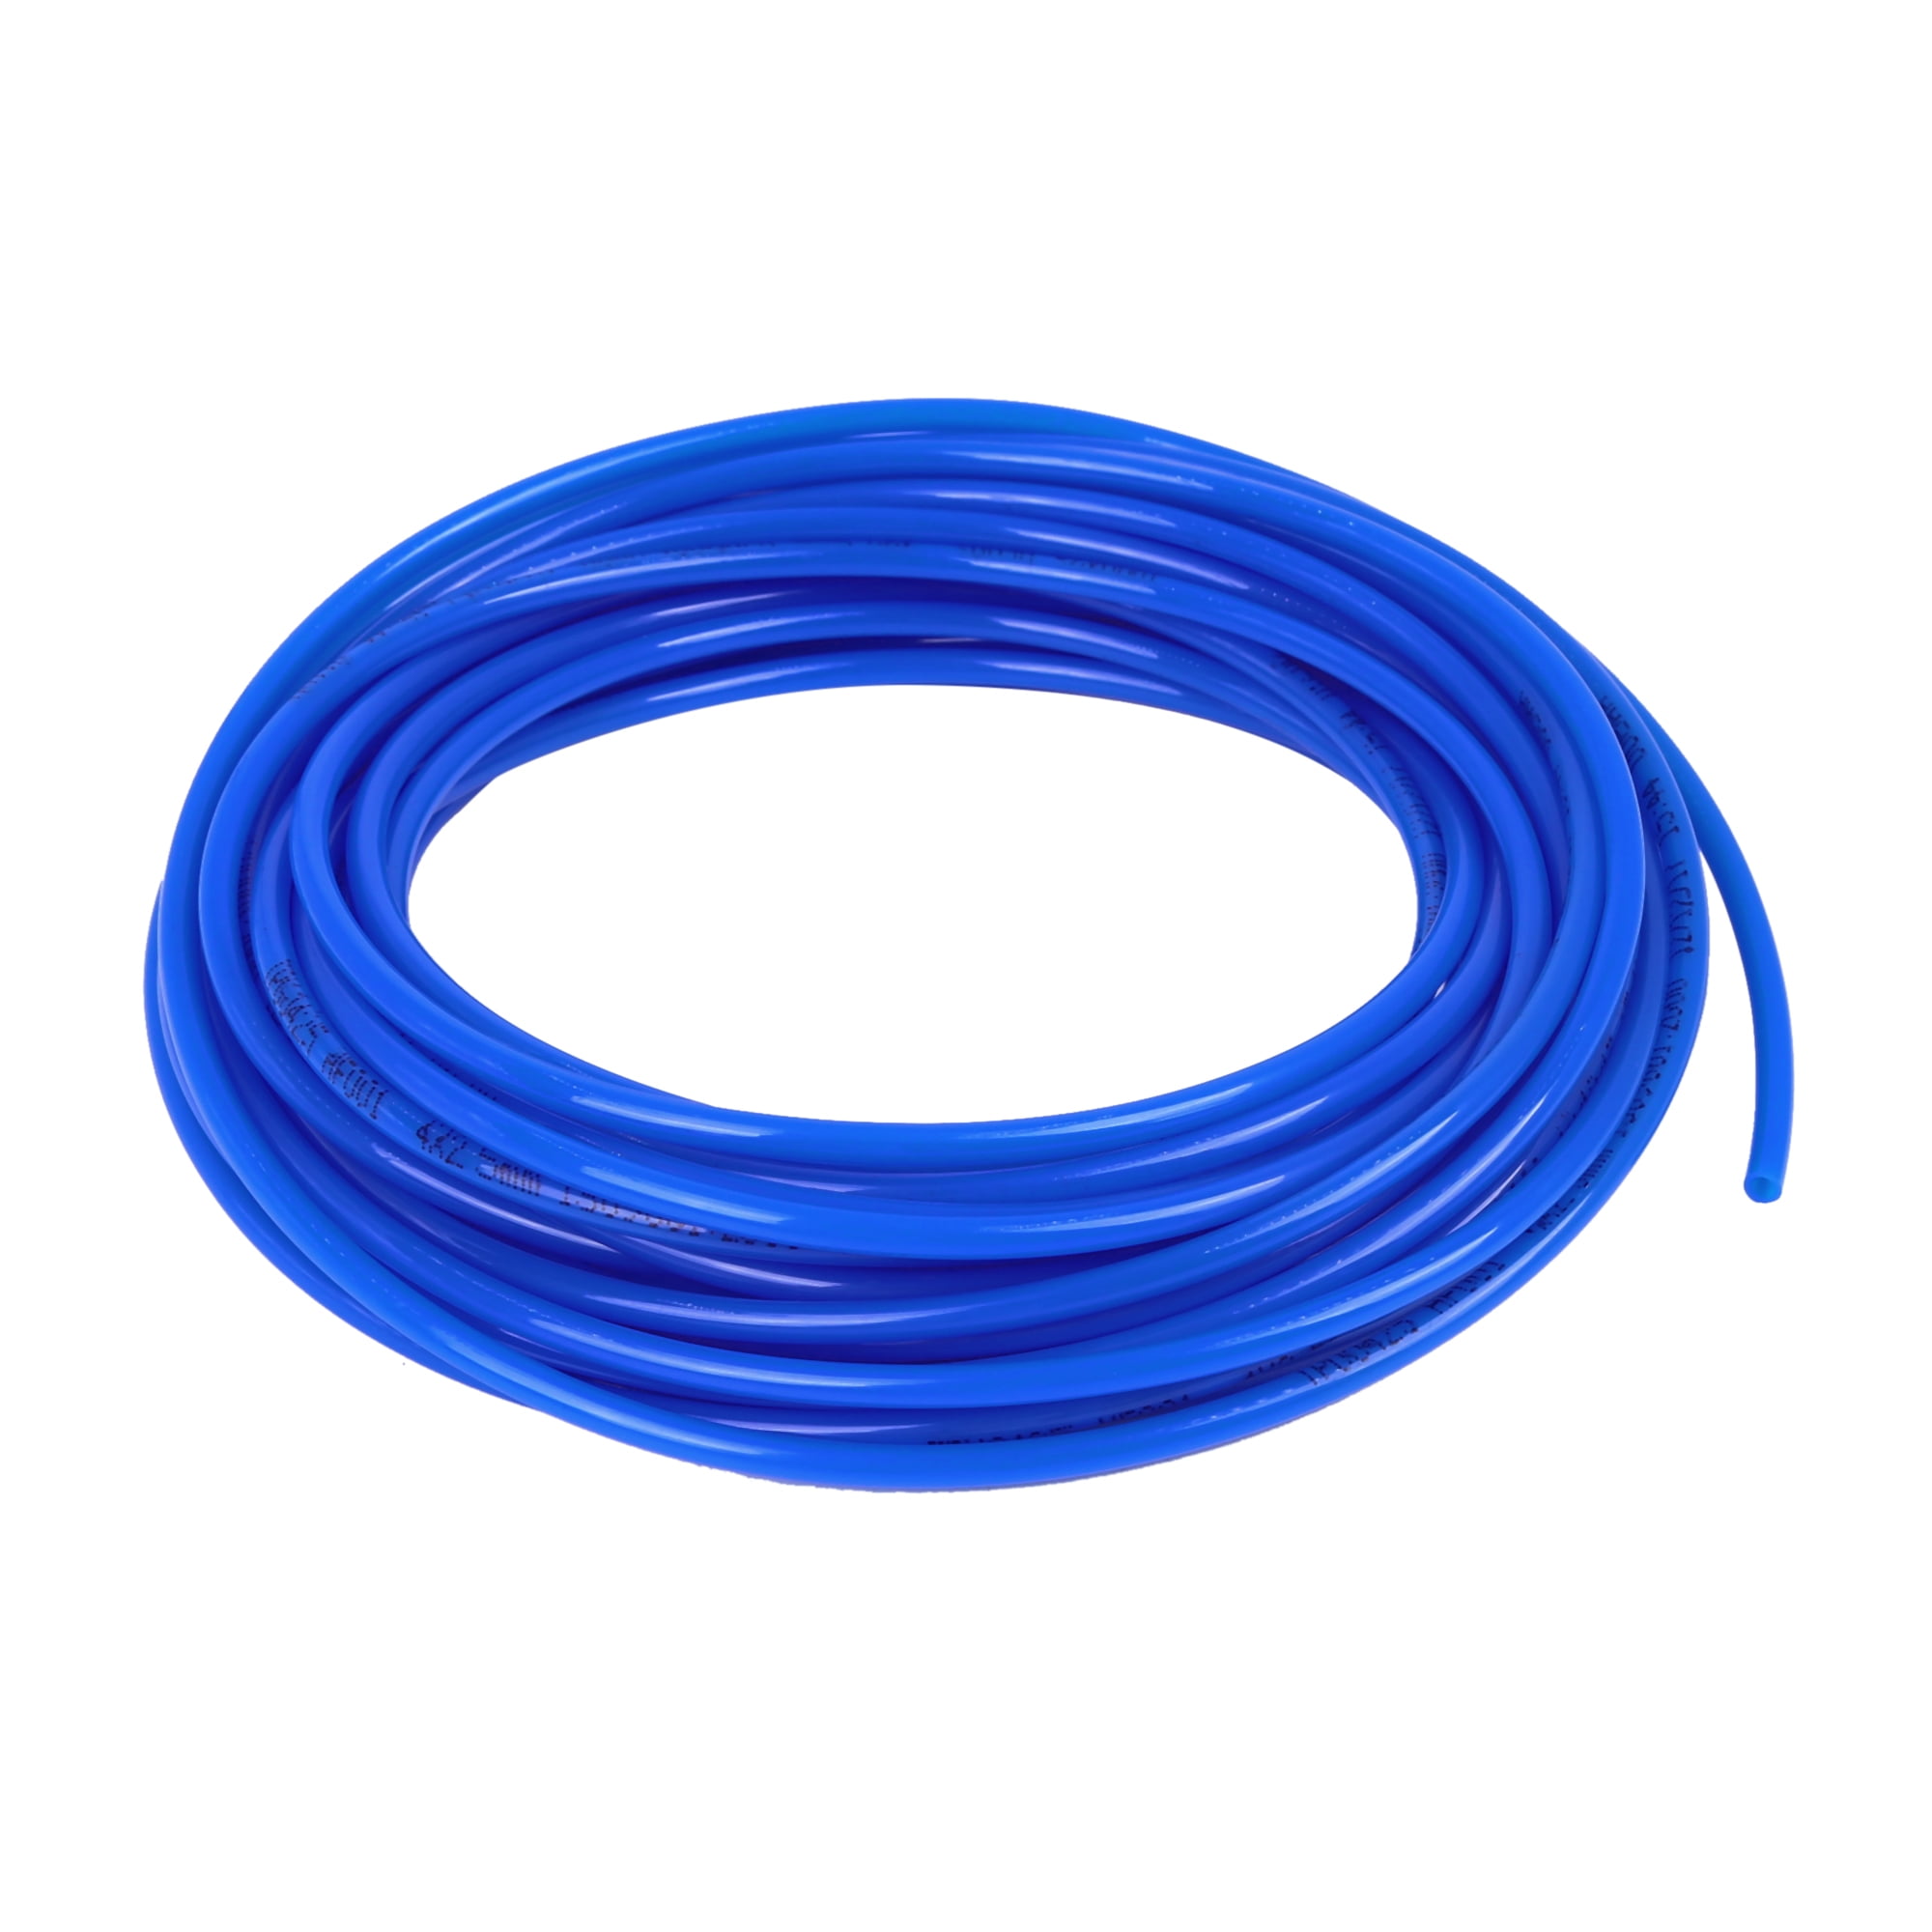 Tubing Pipe 3/8" OD Blue Air Compressor PU Hose Tube for Water 10Meter 32.8ft 